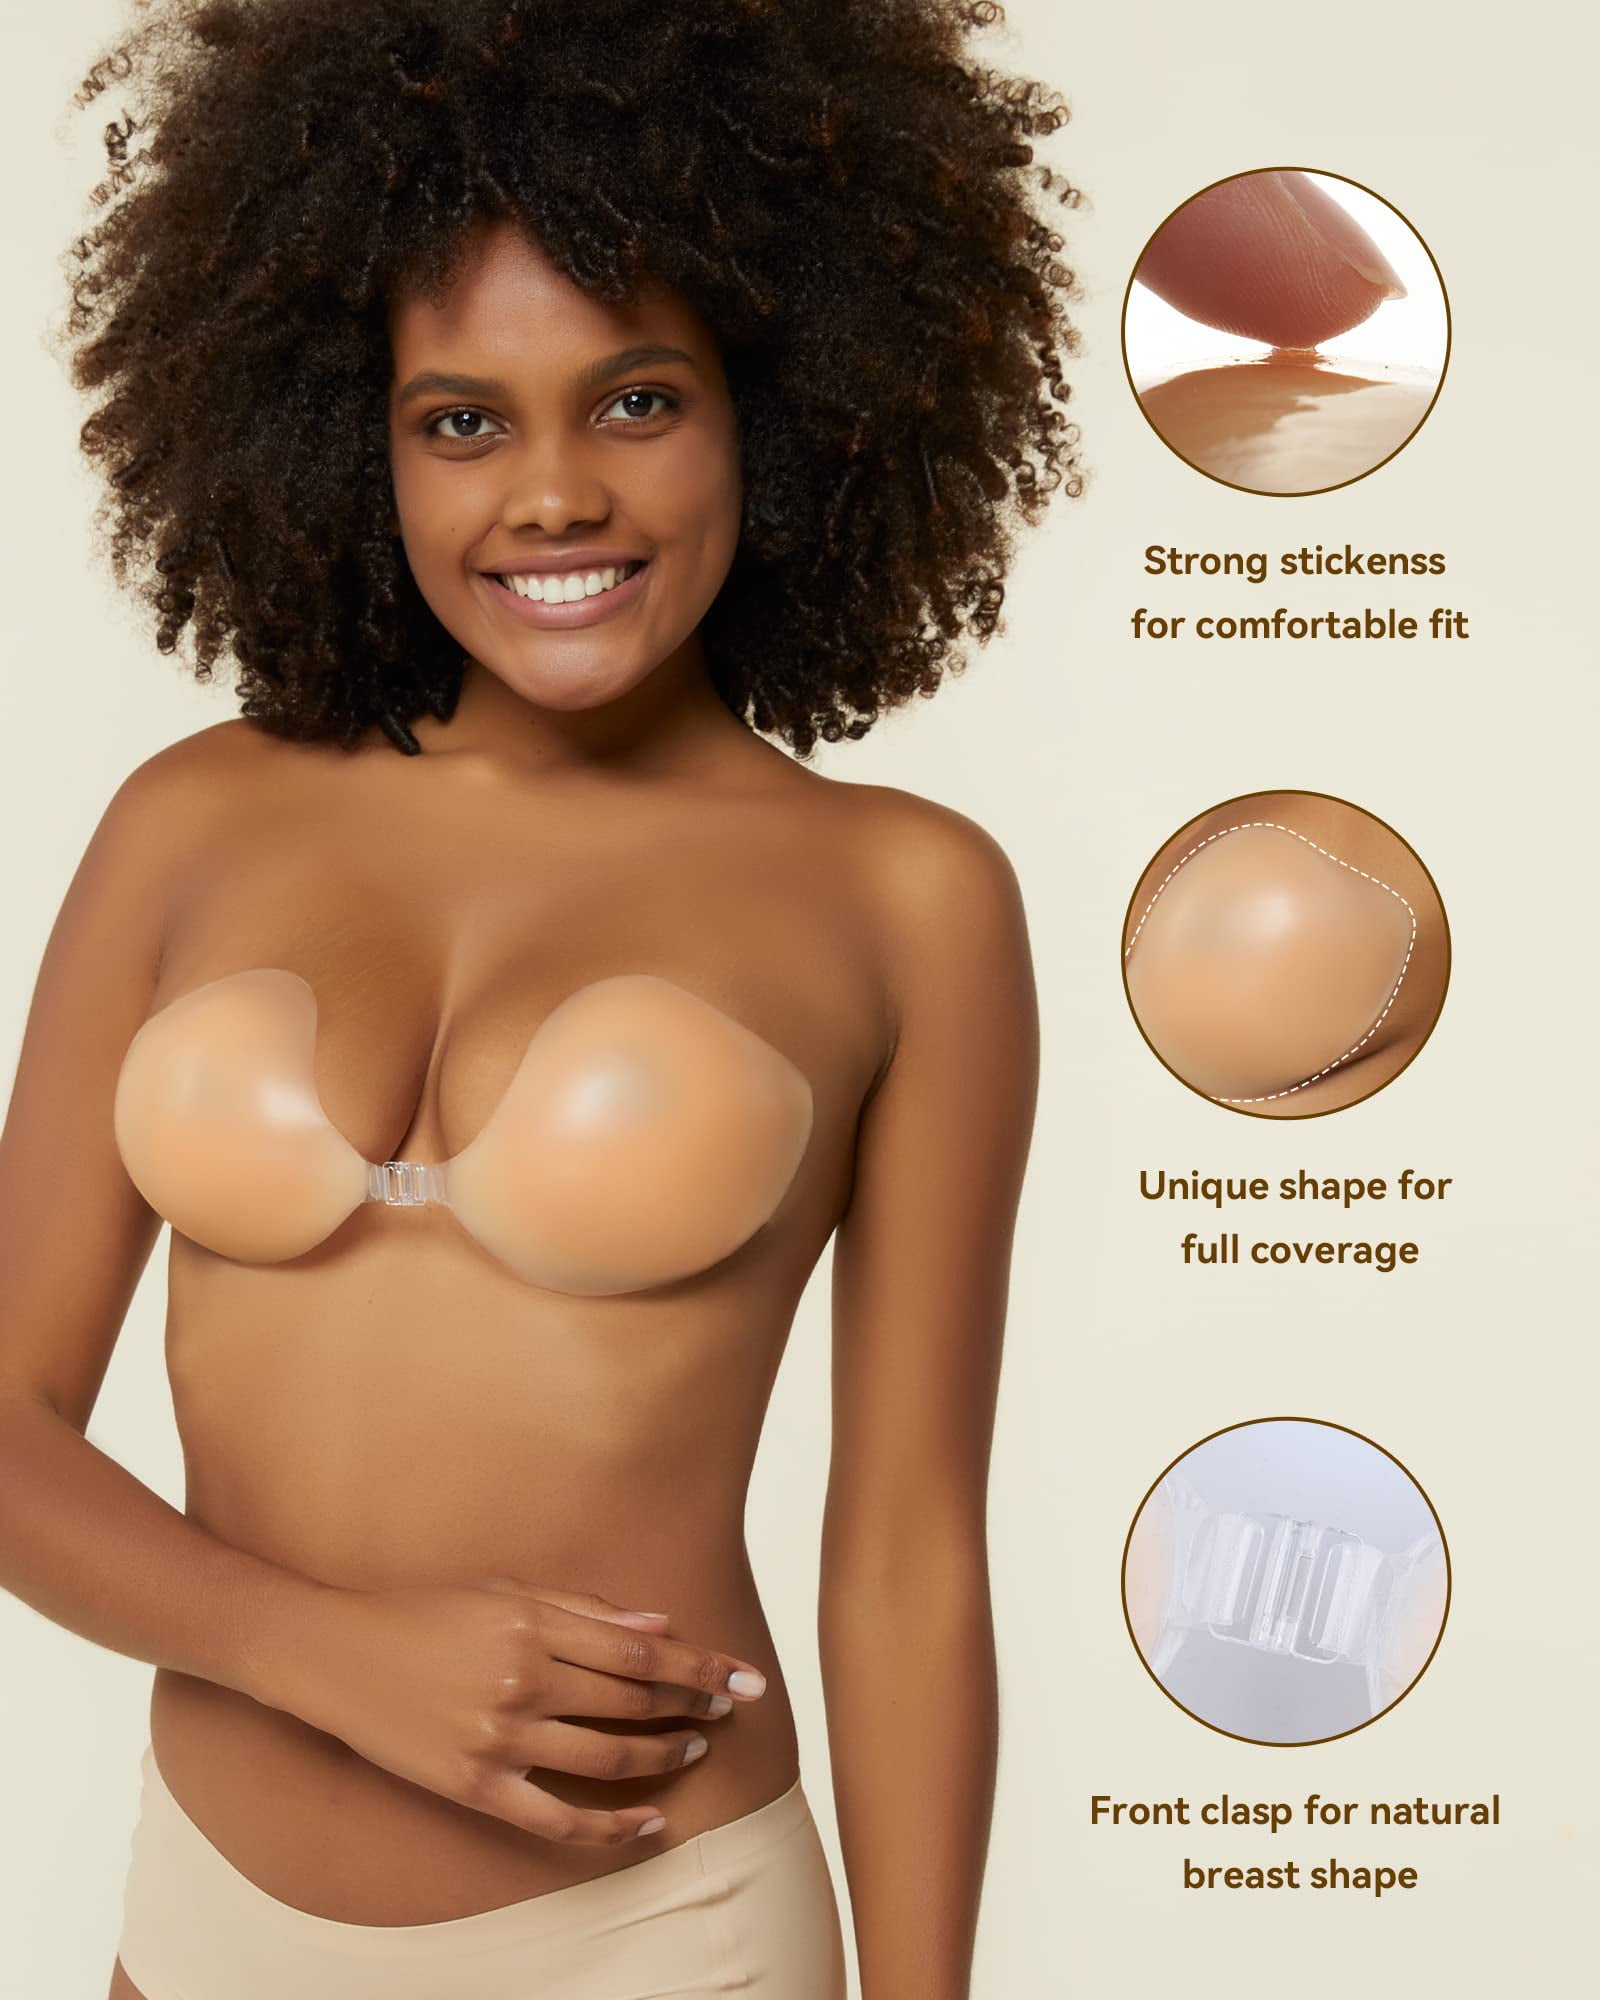 Niidor Adhesive Sticky Bra for Strapless Backless Dress Washable Reusable,  Nude, E : : Clothing, Shoes & Accessories